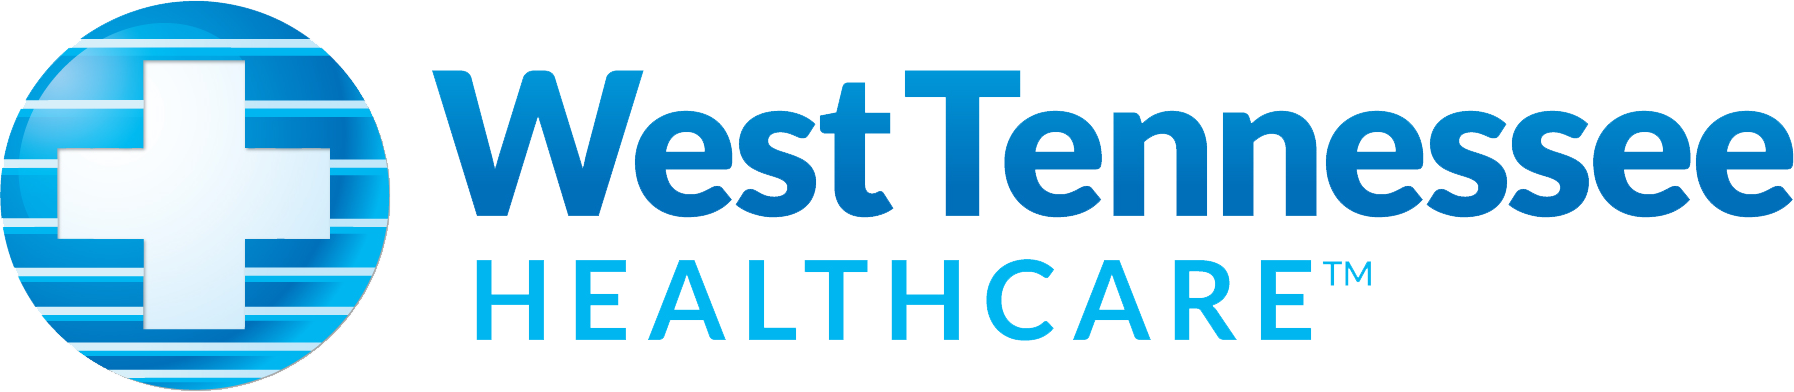 west tennessee healthcare logo